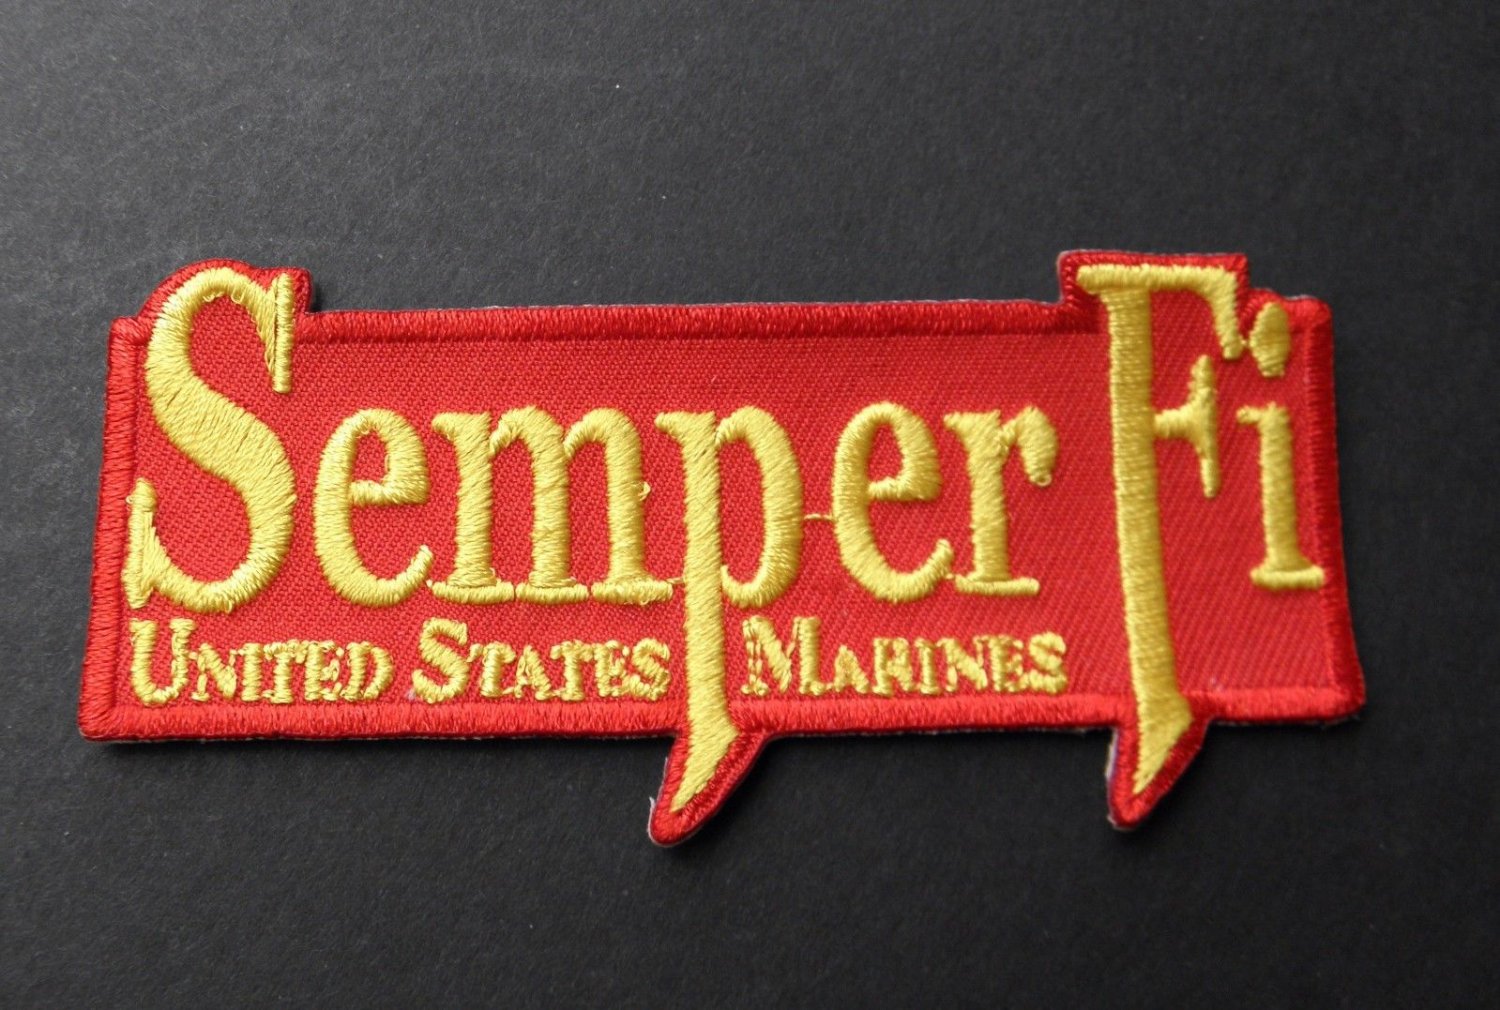 Semper Fi Fidelis Embroidered Patch USMC US Marine Corps Marines 4 X 2 Inch...